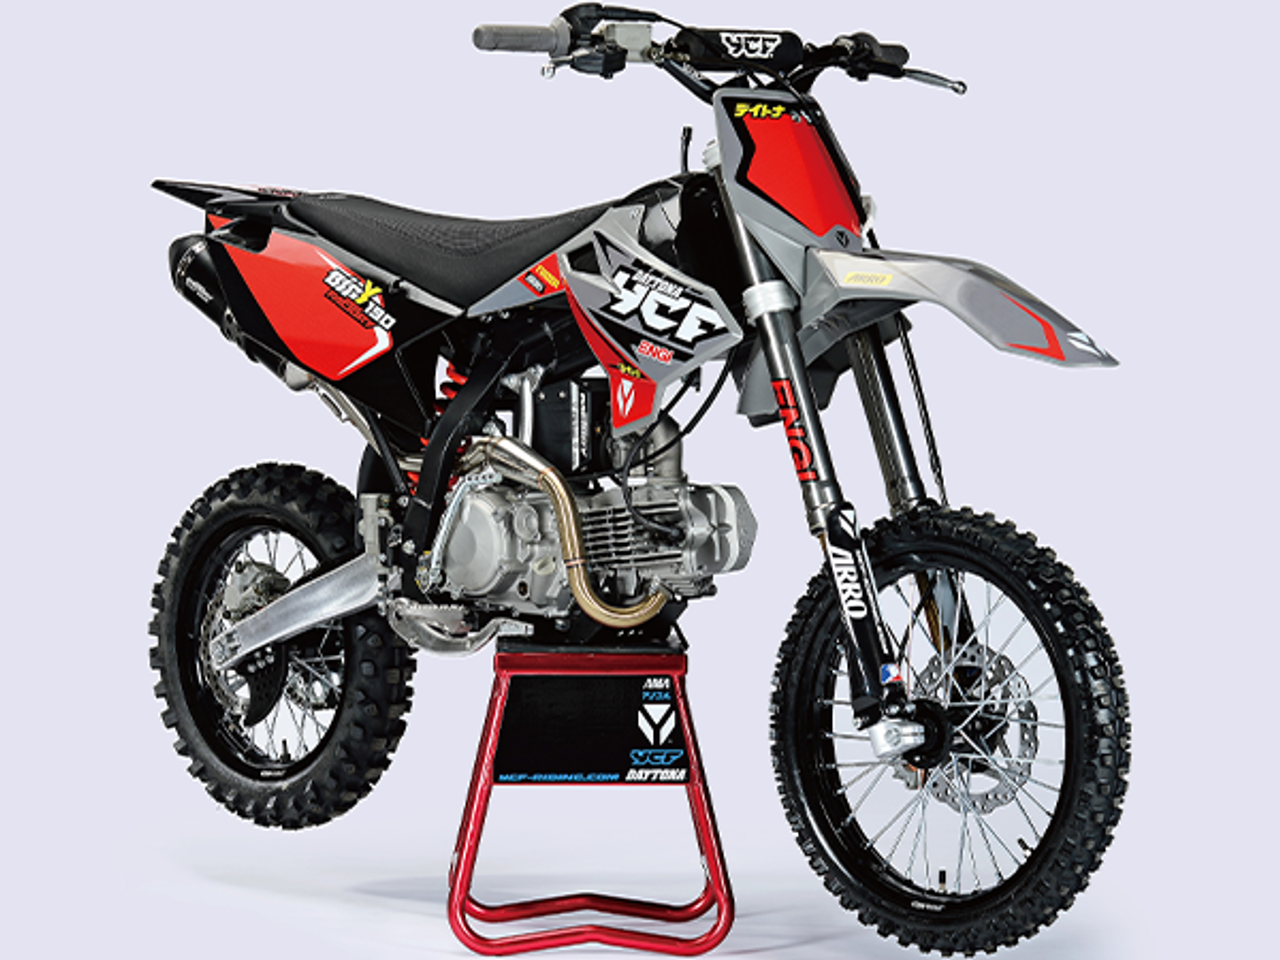 YCF 190 Bigy Electric Start Dirtbike Motorcycle | Pitbikes for Sale: MOTO-D  Racing